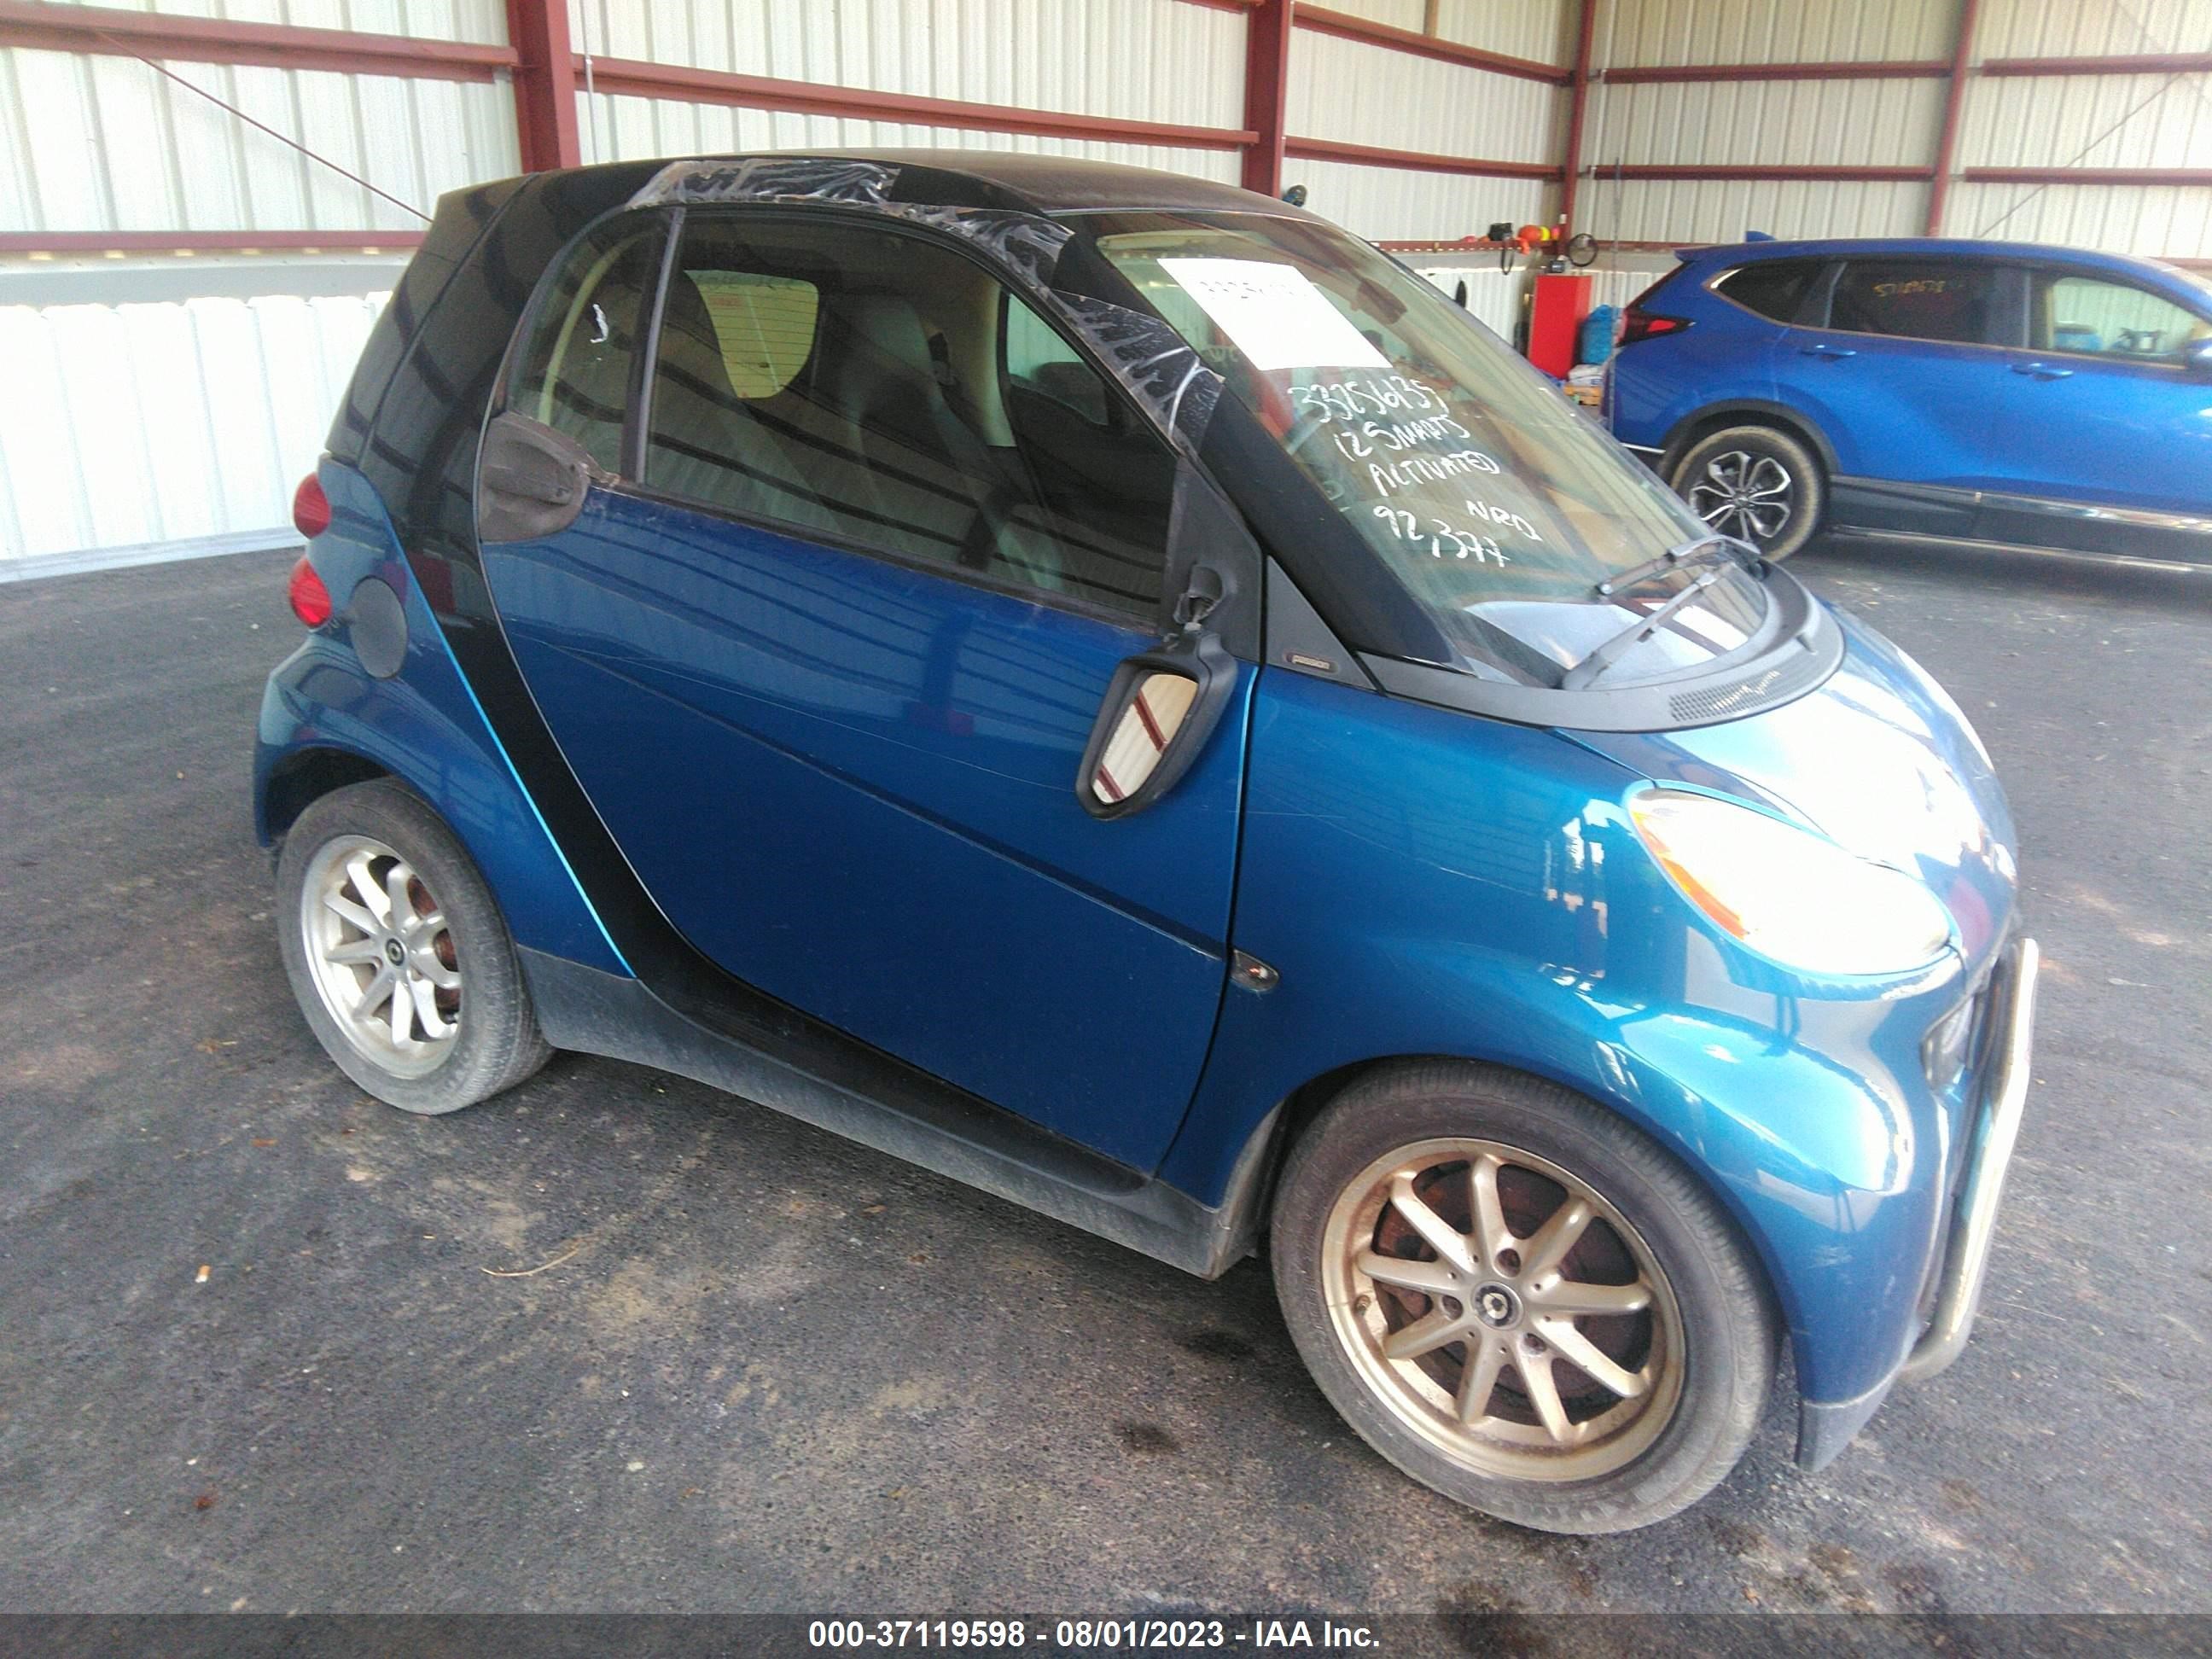 vin: WMEEJ31X48K195148 WMEEJ31X48K195148 2008 smart fortwo 1000 for Sale in 12701, 65 Kaufman Rd, Monticello, New York, USA